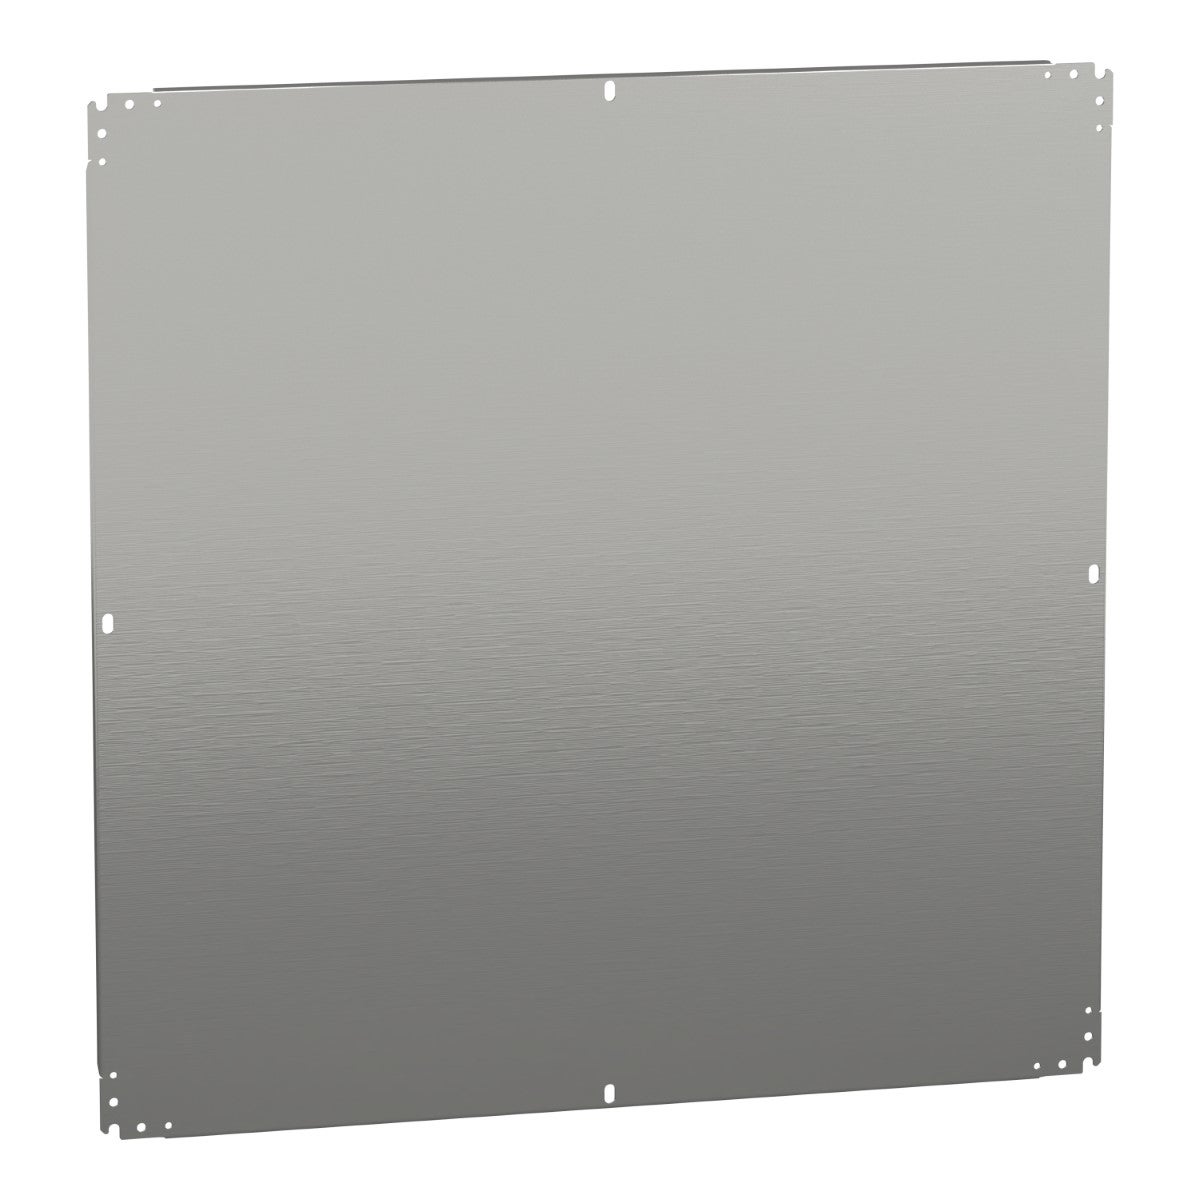 Plain mounting plate H1000xW1000mm made of galvanised sheet steel